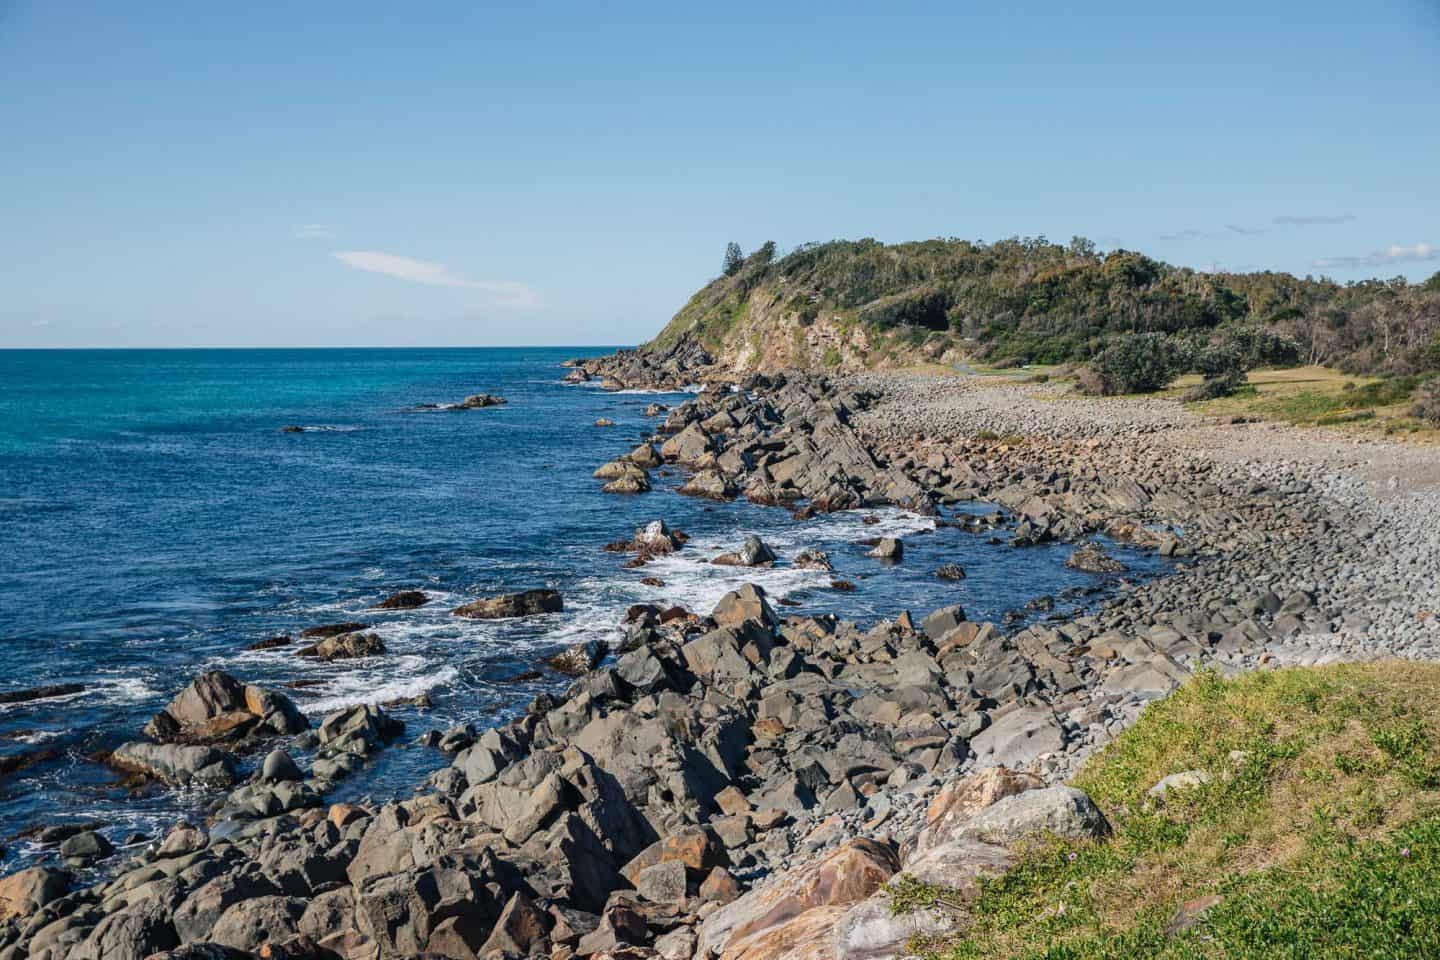 Forster nsw, things to do in forster, what to do in forster, things to do forster, camping in forster, beaches in forster, beaches at forster, pebbly beach forster, the tanks forster, the tanks